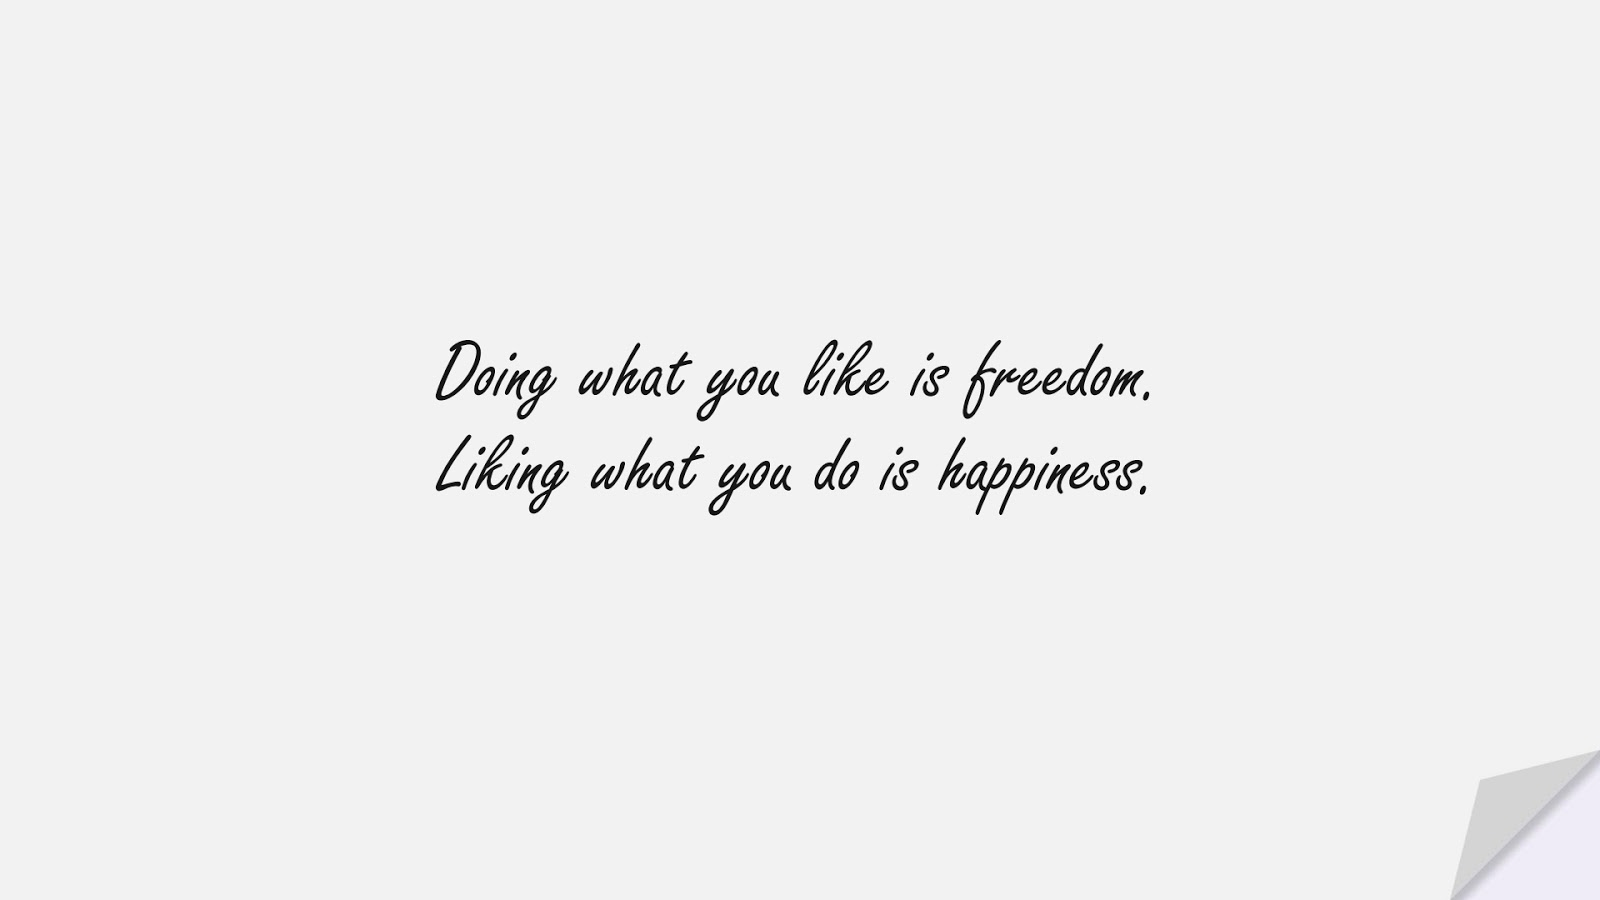 Doing what you like is freedom. Liking what you do is happiness.FALSE